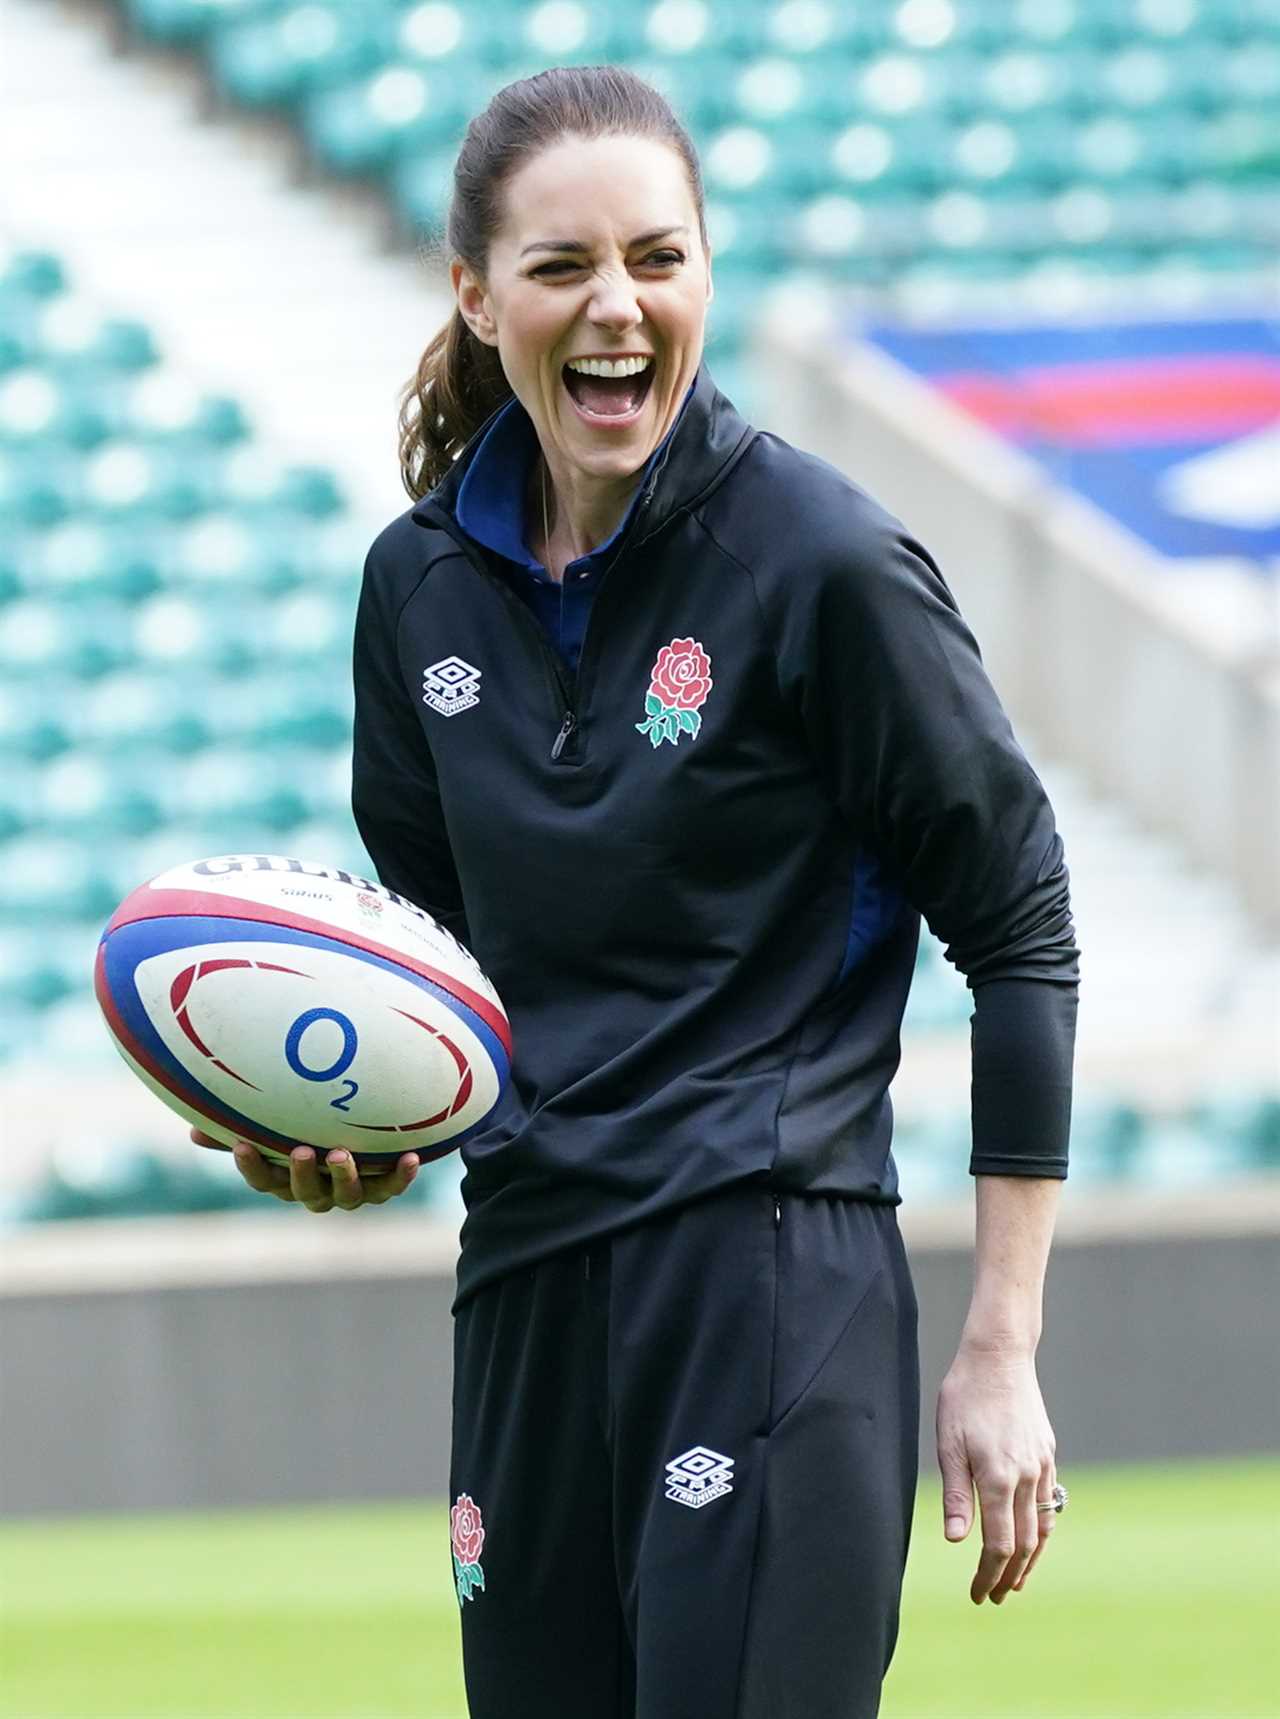 Princess Kate Middleton to cheer on England’s men and women in rugby World Cup after succeeding Prince Harry in RFL role